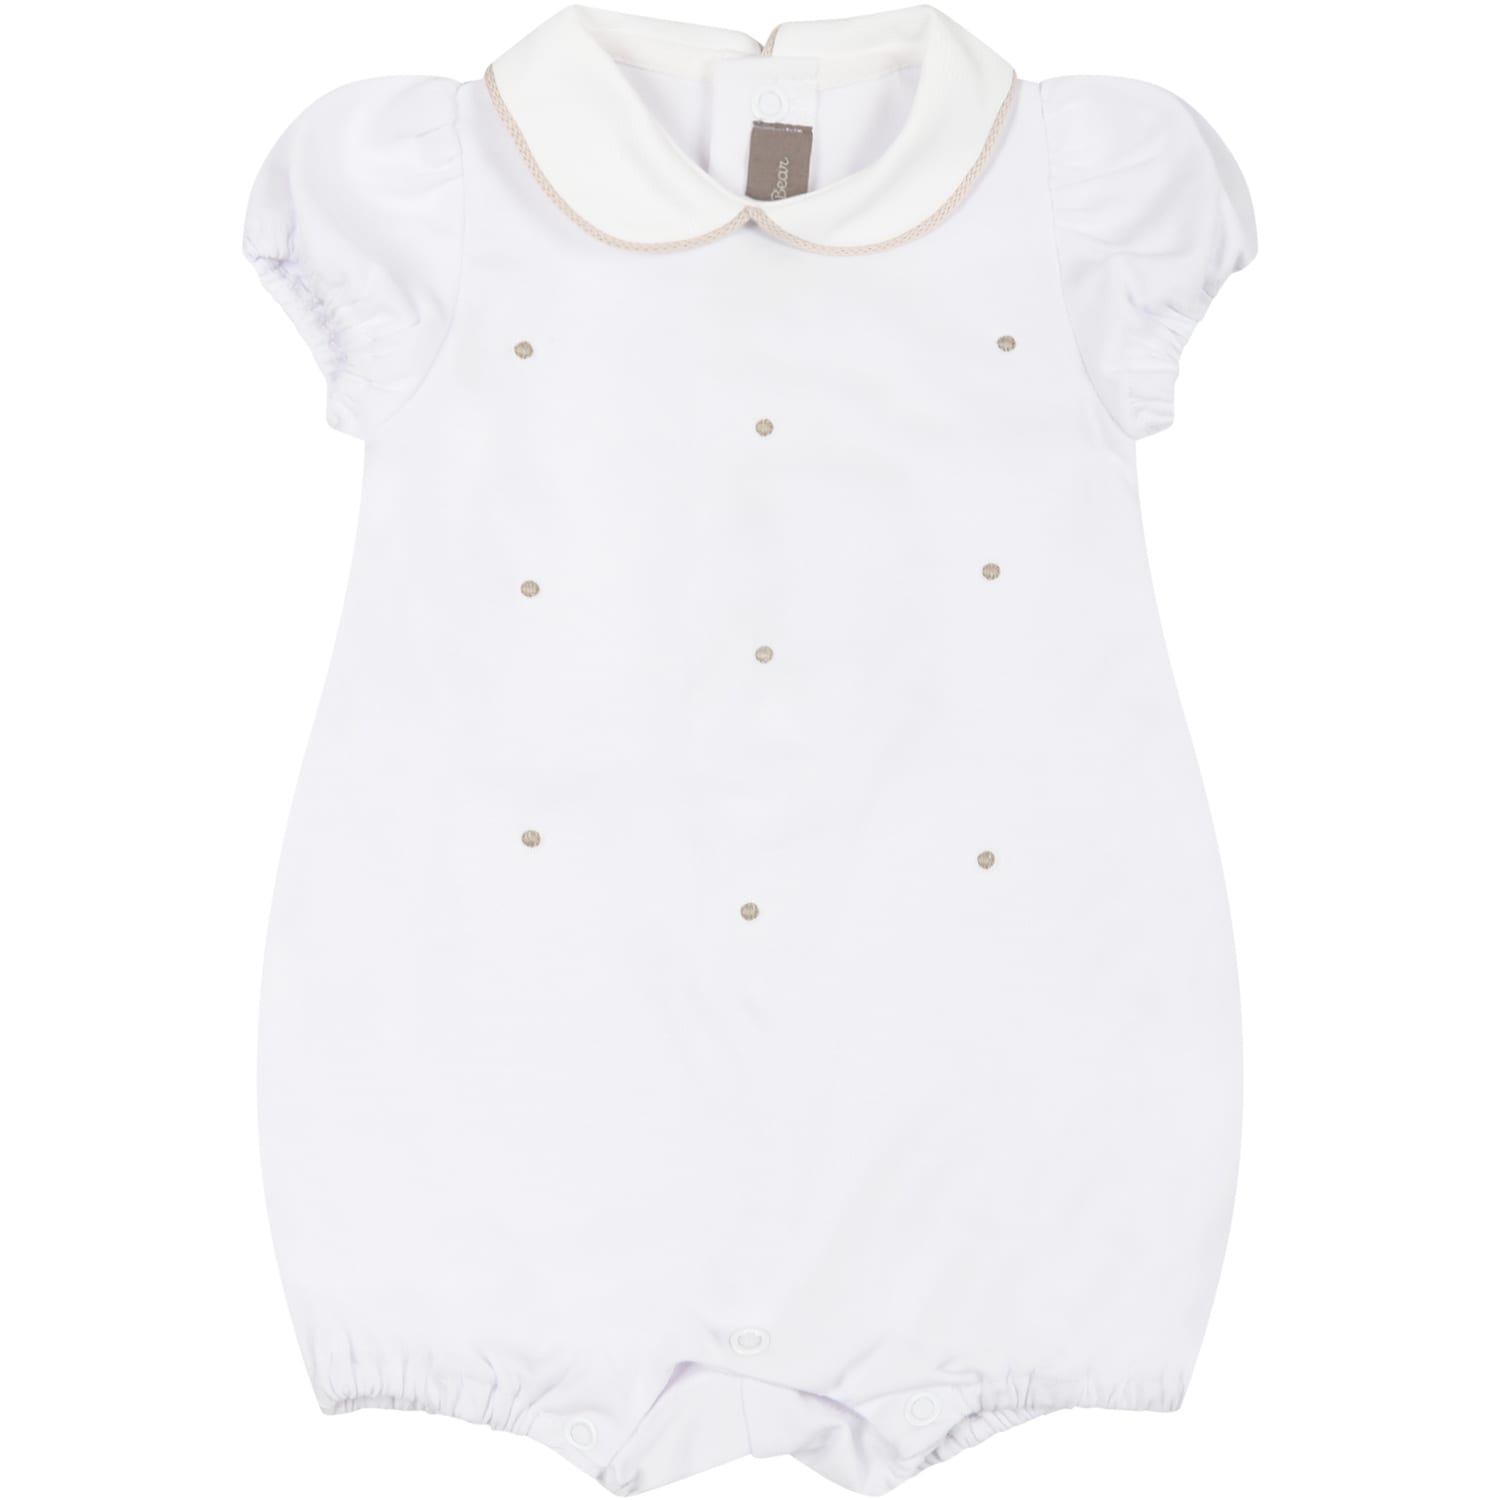 Little Bear White Romper For Baby Kids With Polka-dots